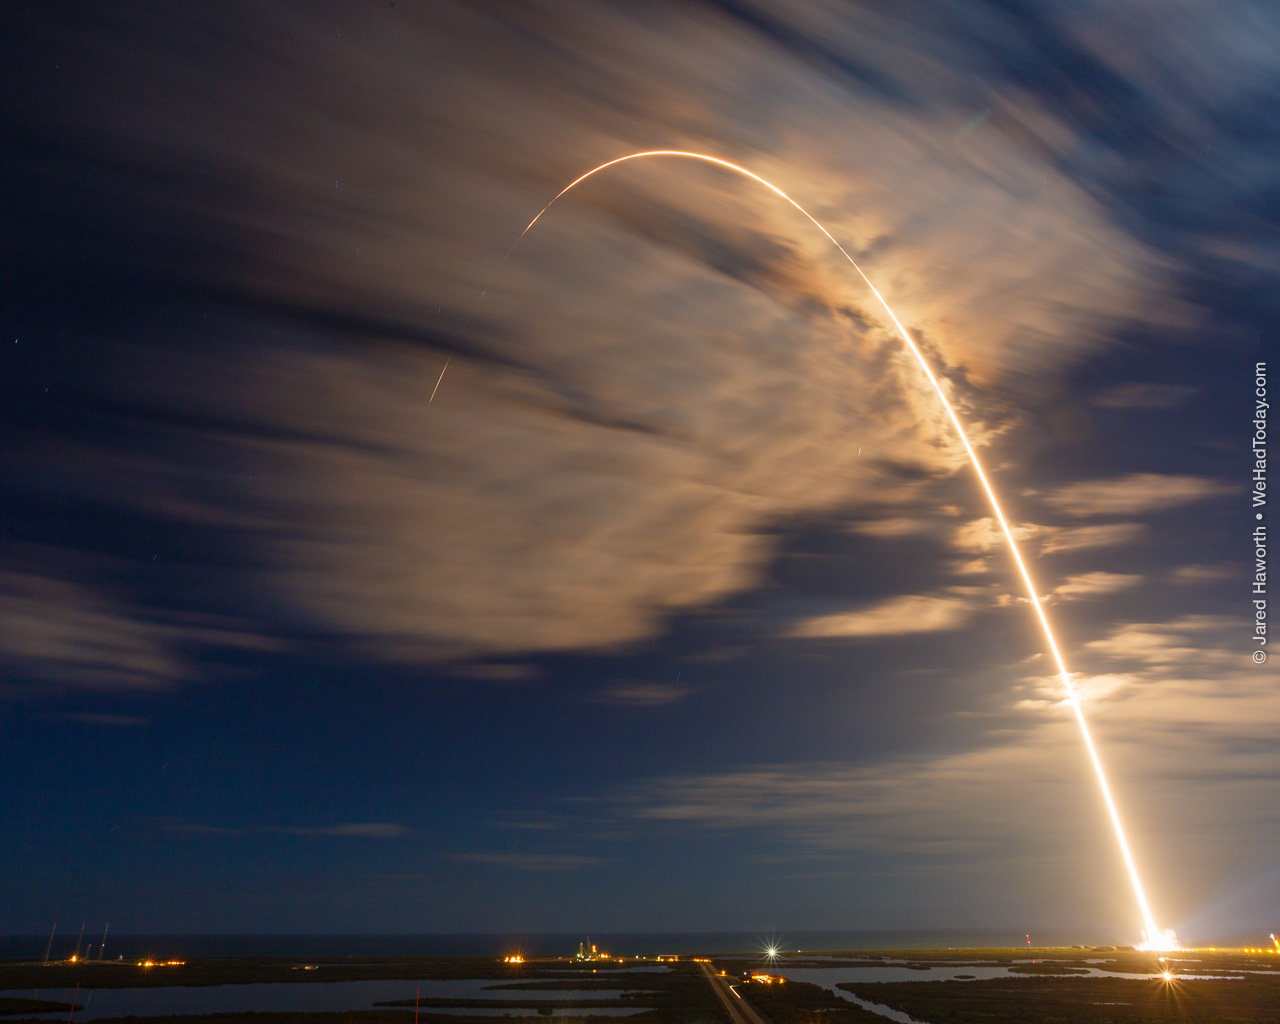 Three minutes of flight of the Atlas V 401 carrying Cygnus to the International Space Station